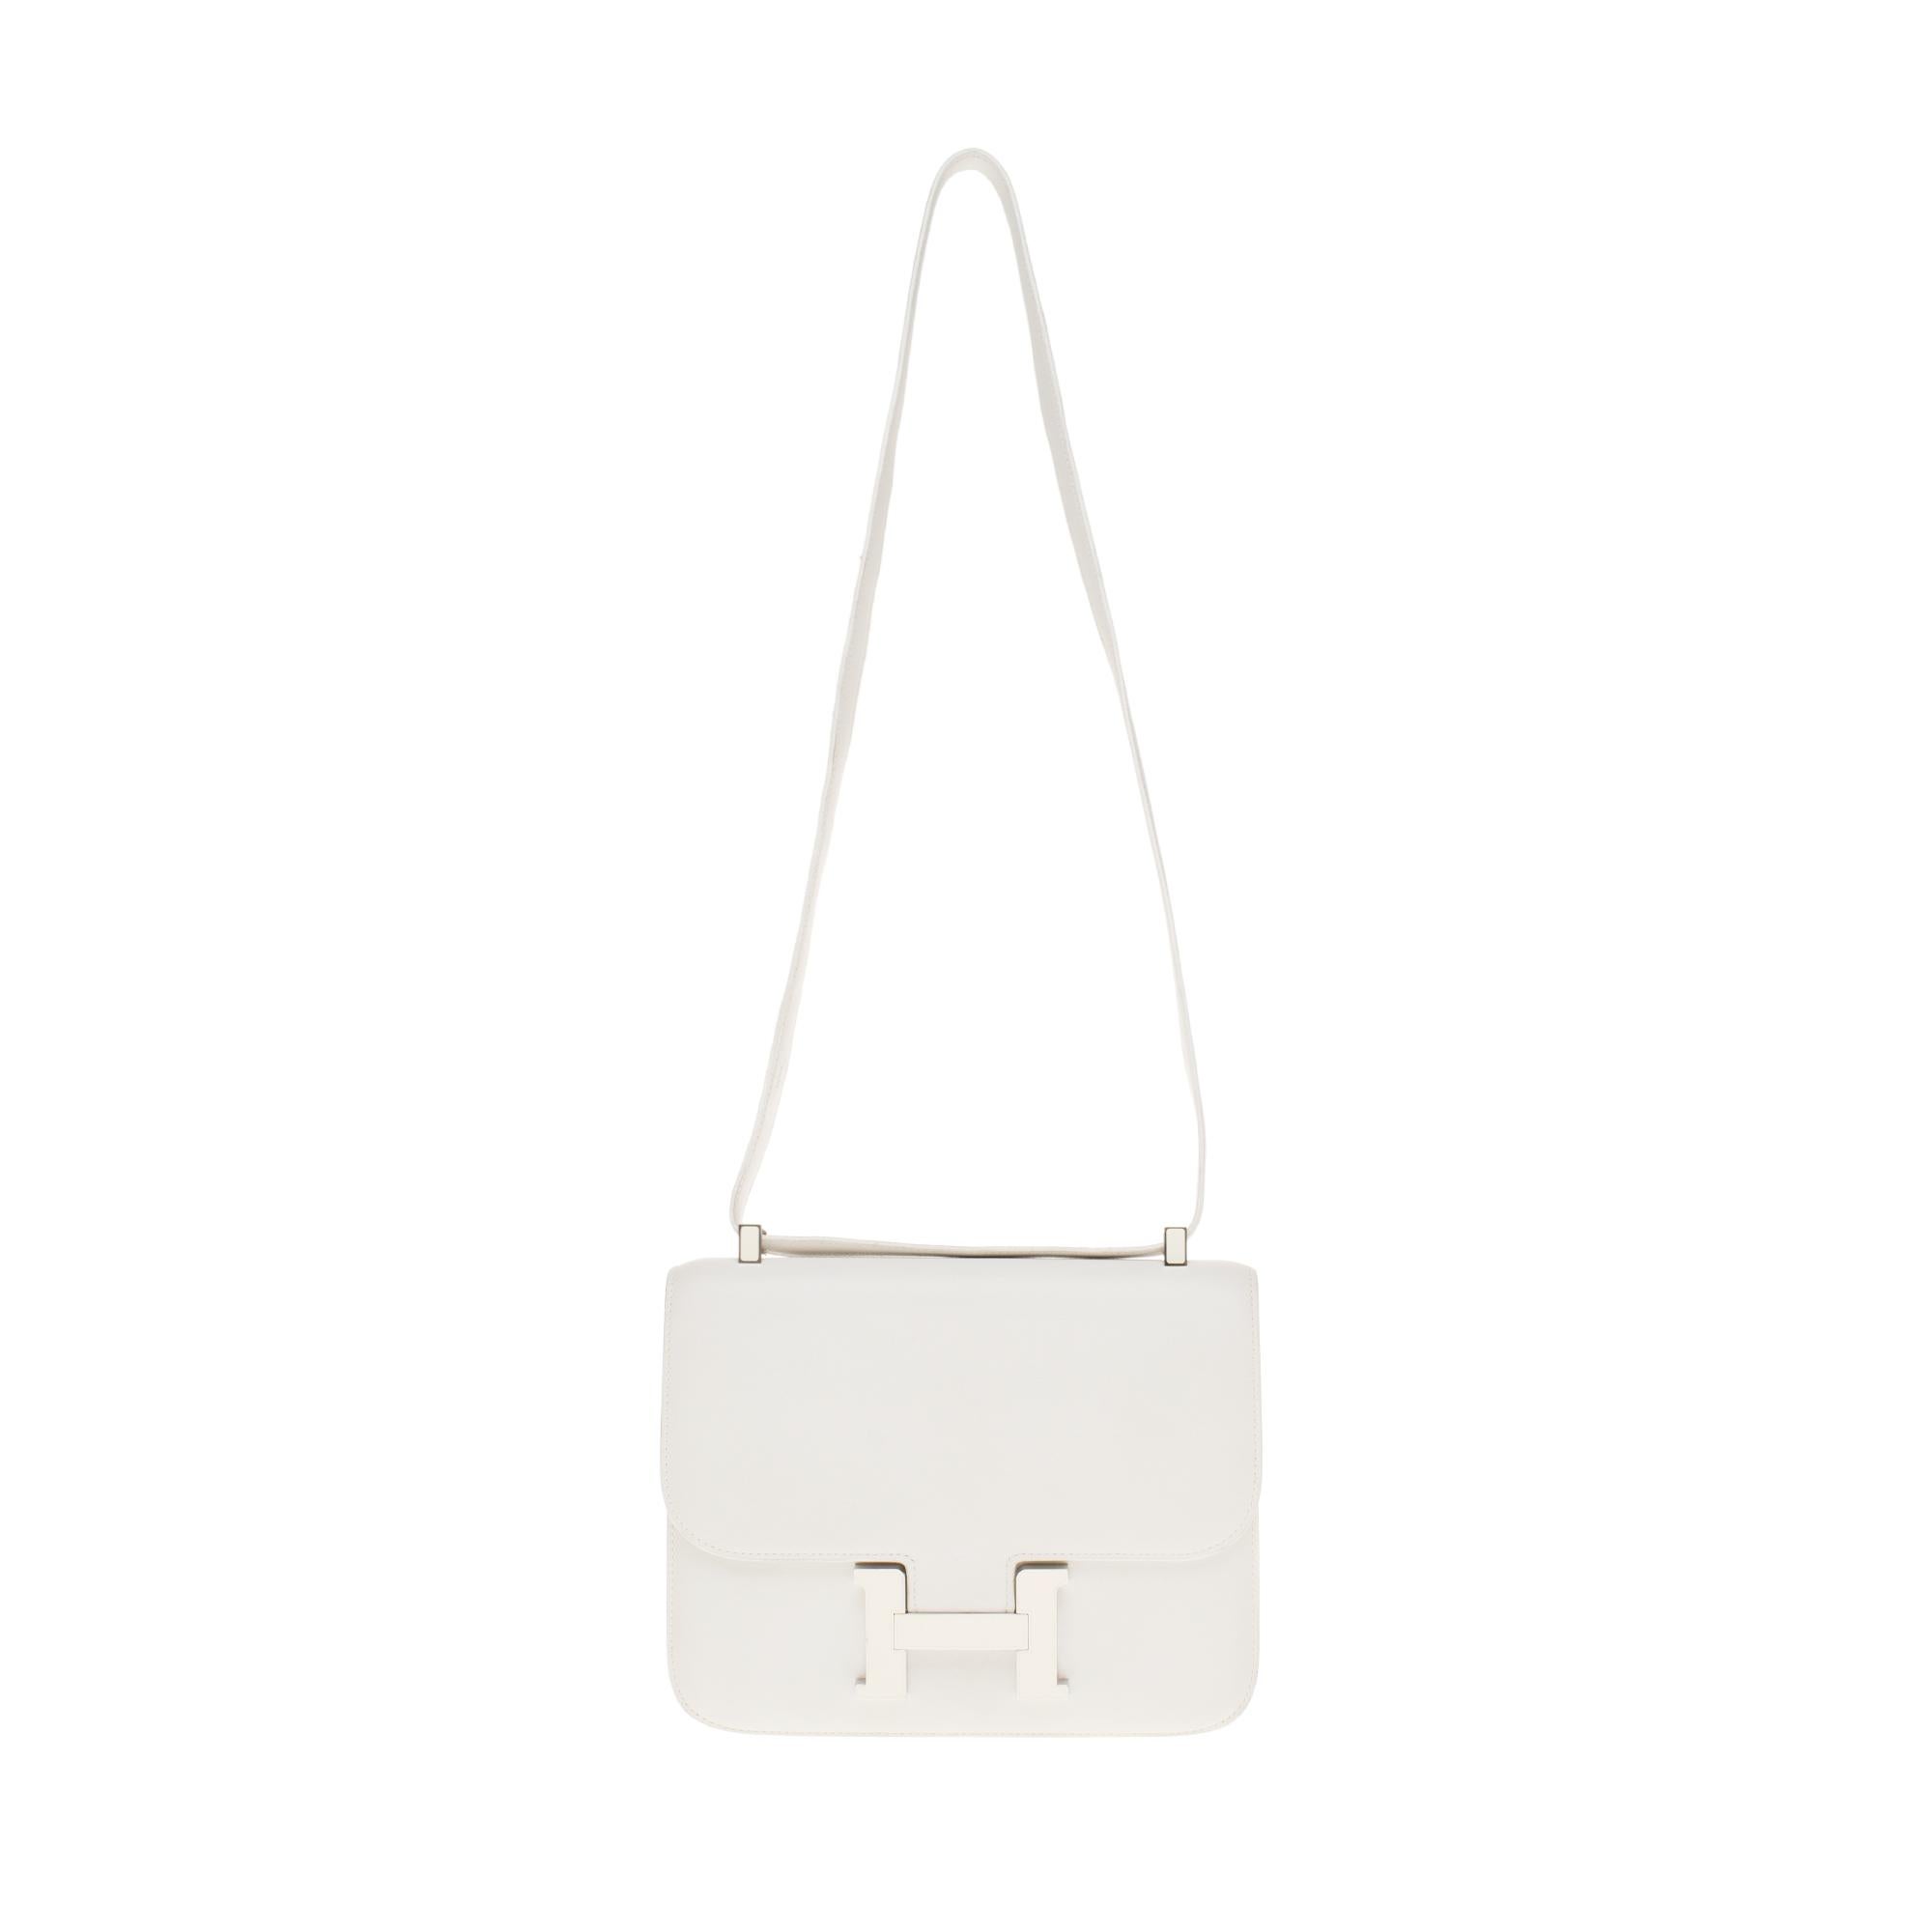 This is an exceptional piece essential for your summer:

Splendide & Rare Hermes Constance 23 cm handbag in white calfskin leather with gold hardware and enamel , white leather handle that can be easily carried by hand or shoulder.

H-shaped closure